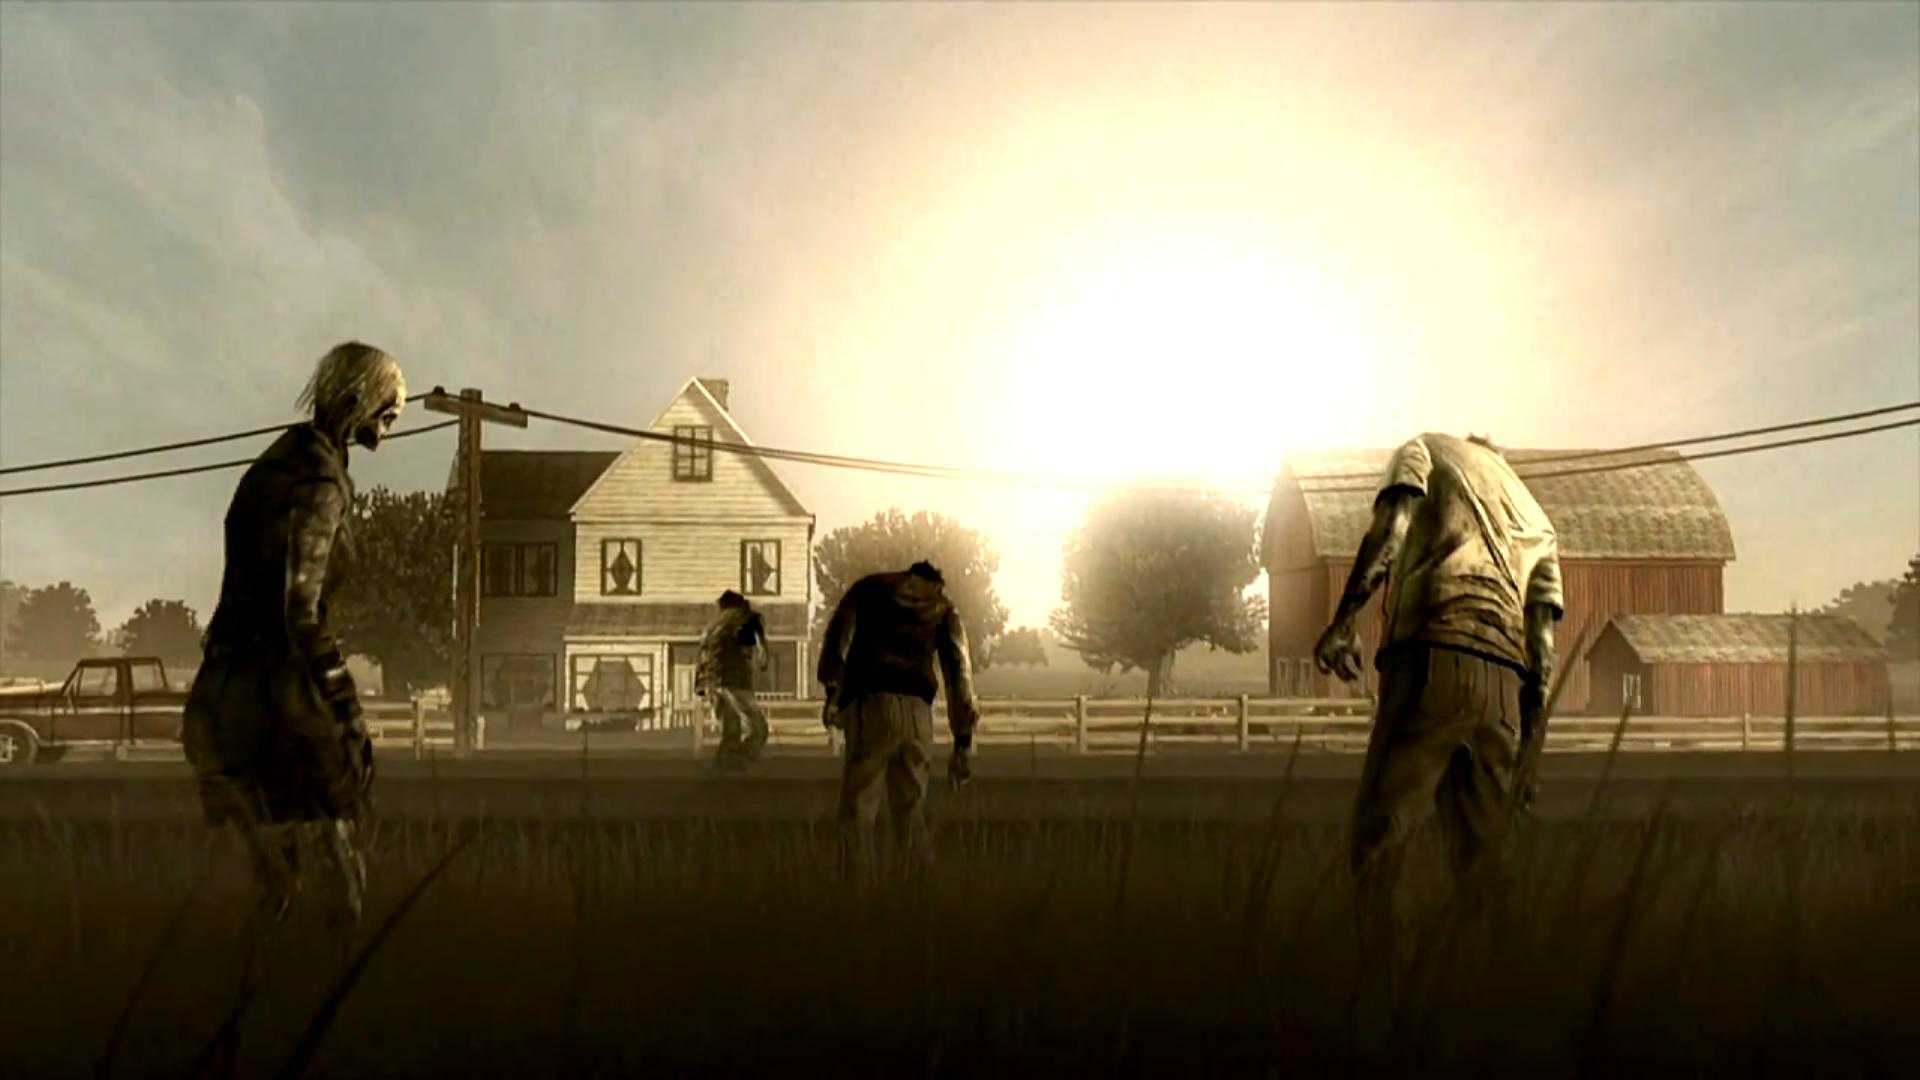 The Walking Dead Wallpaper High Resolution Game Of Mobile Qimplink